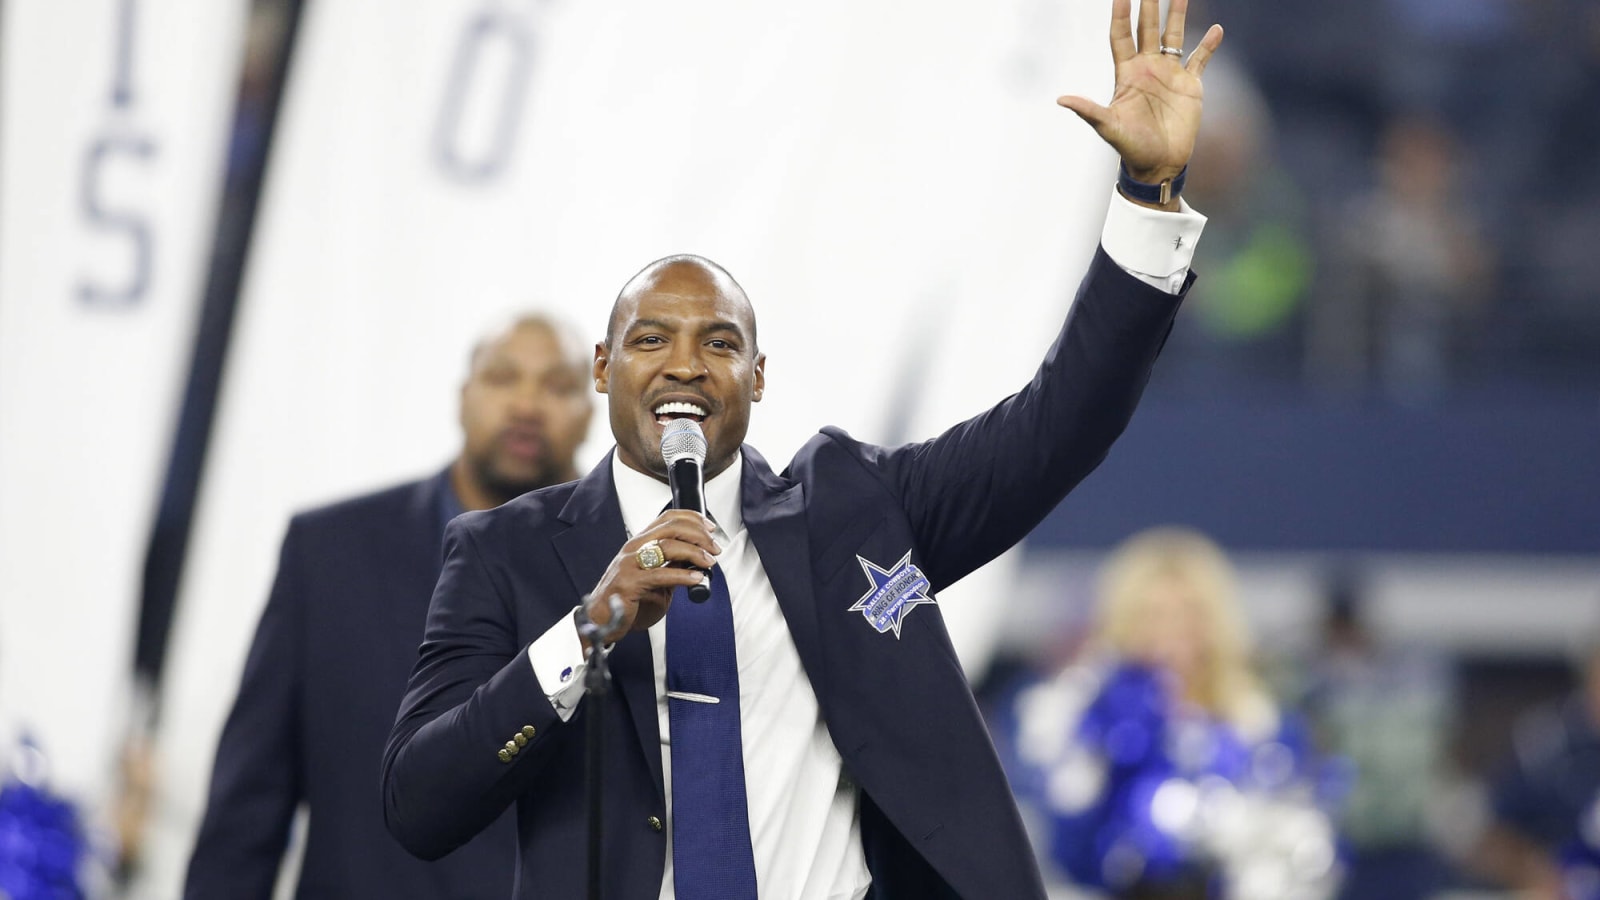 DeMarcus Ware, Darren Woodson Semifinalists for Pro Football Hall of Fame 2023